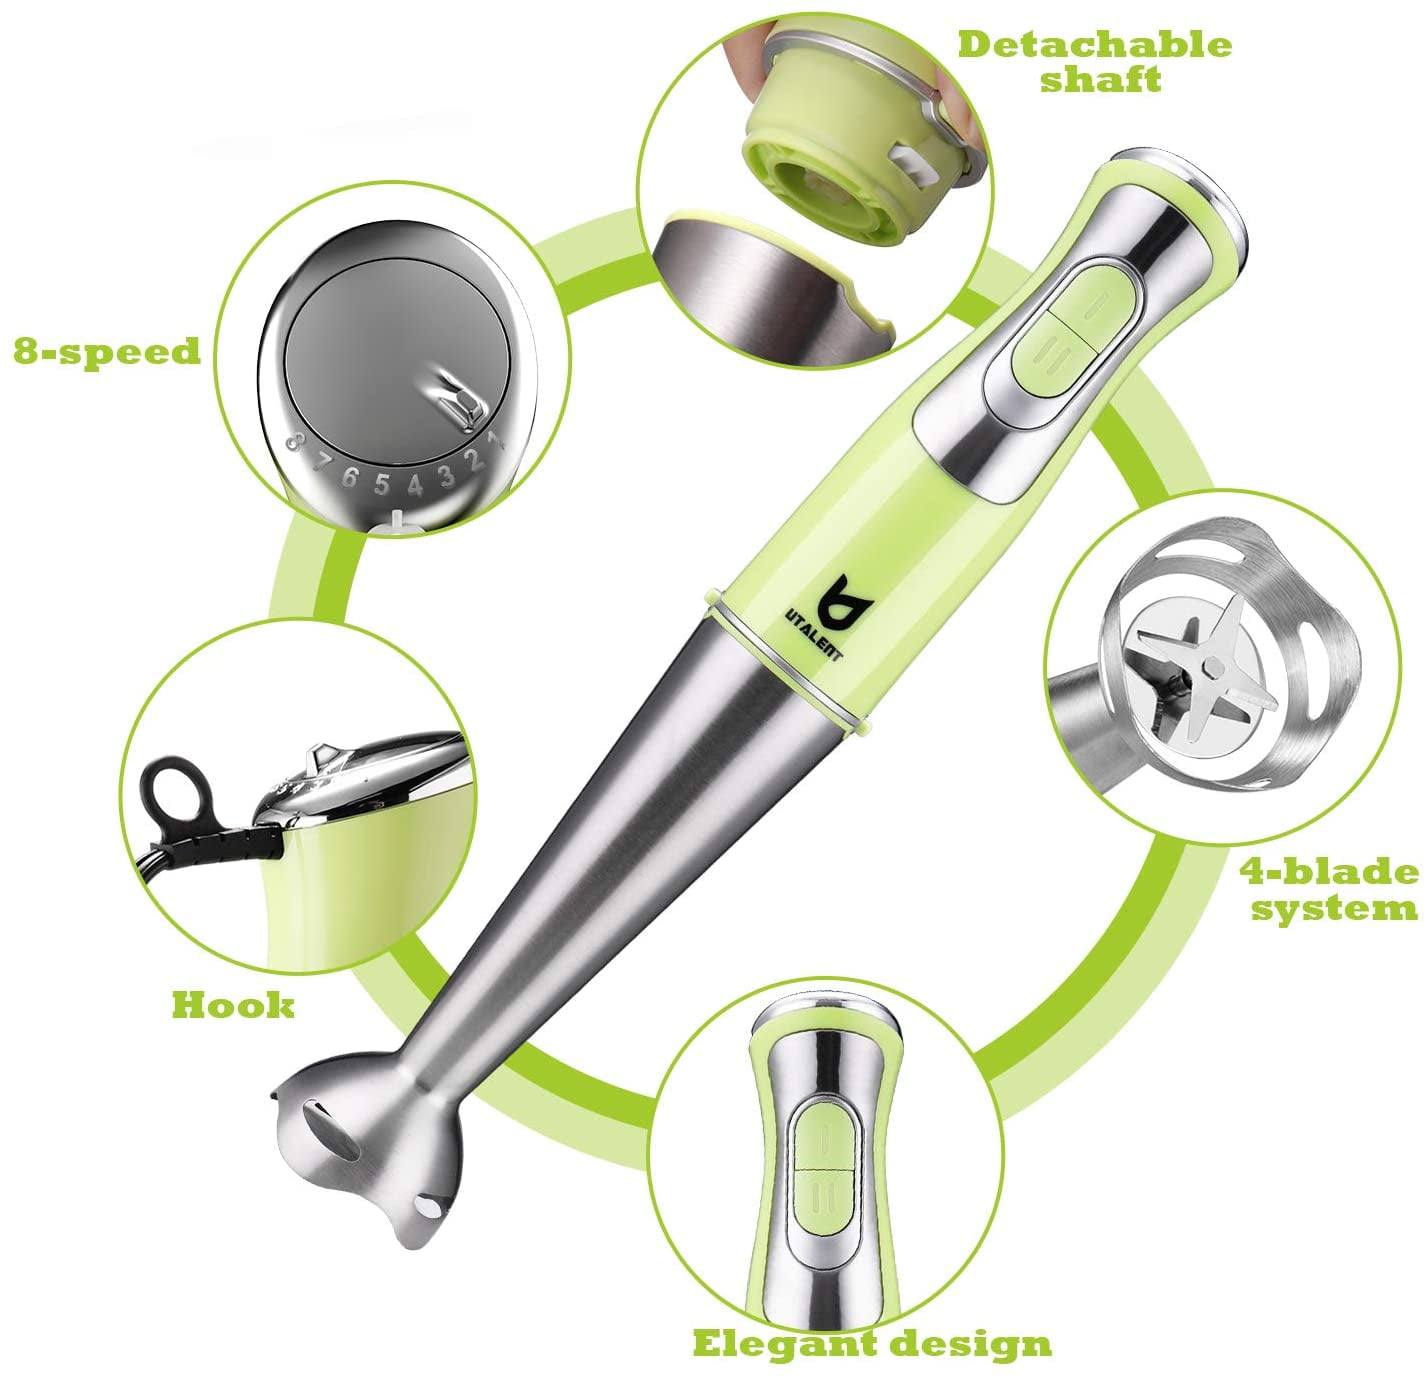 Immersion Hand Blender UTALENT 5-in-1 8-Speed Stick Blender without the CUP